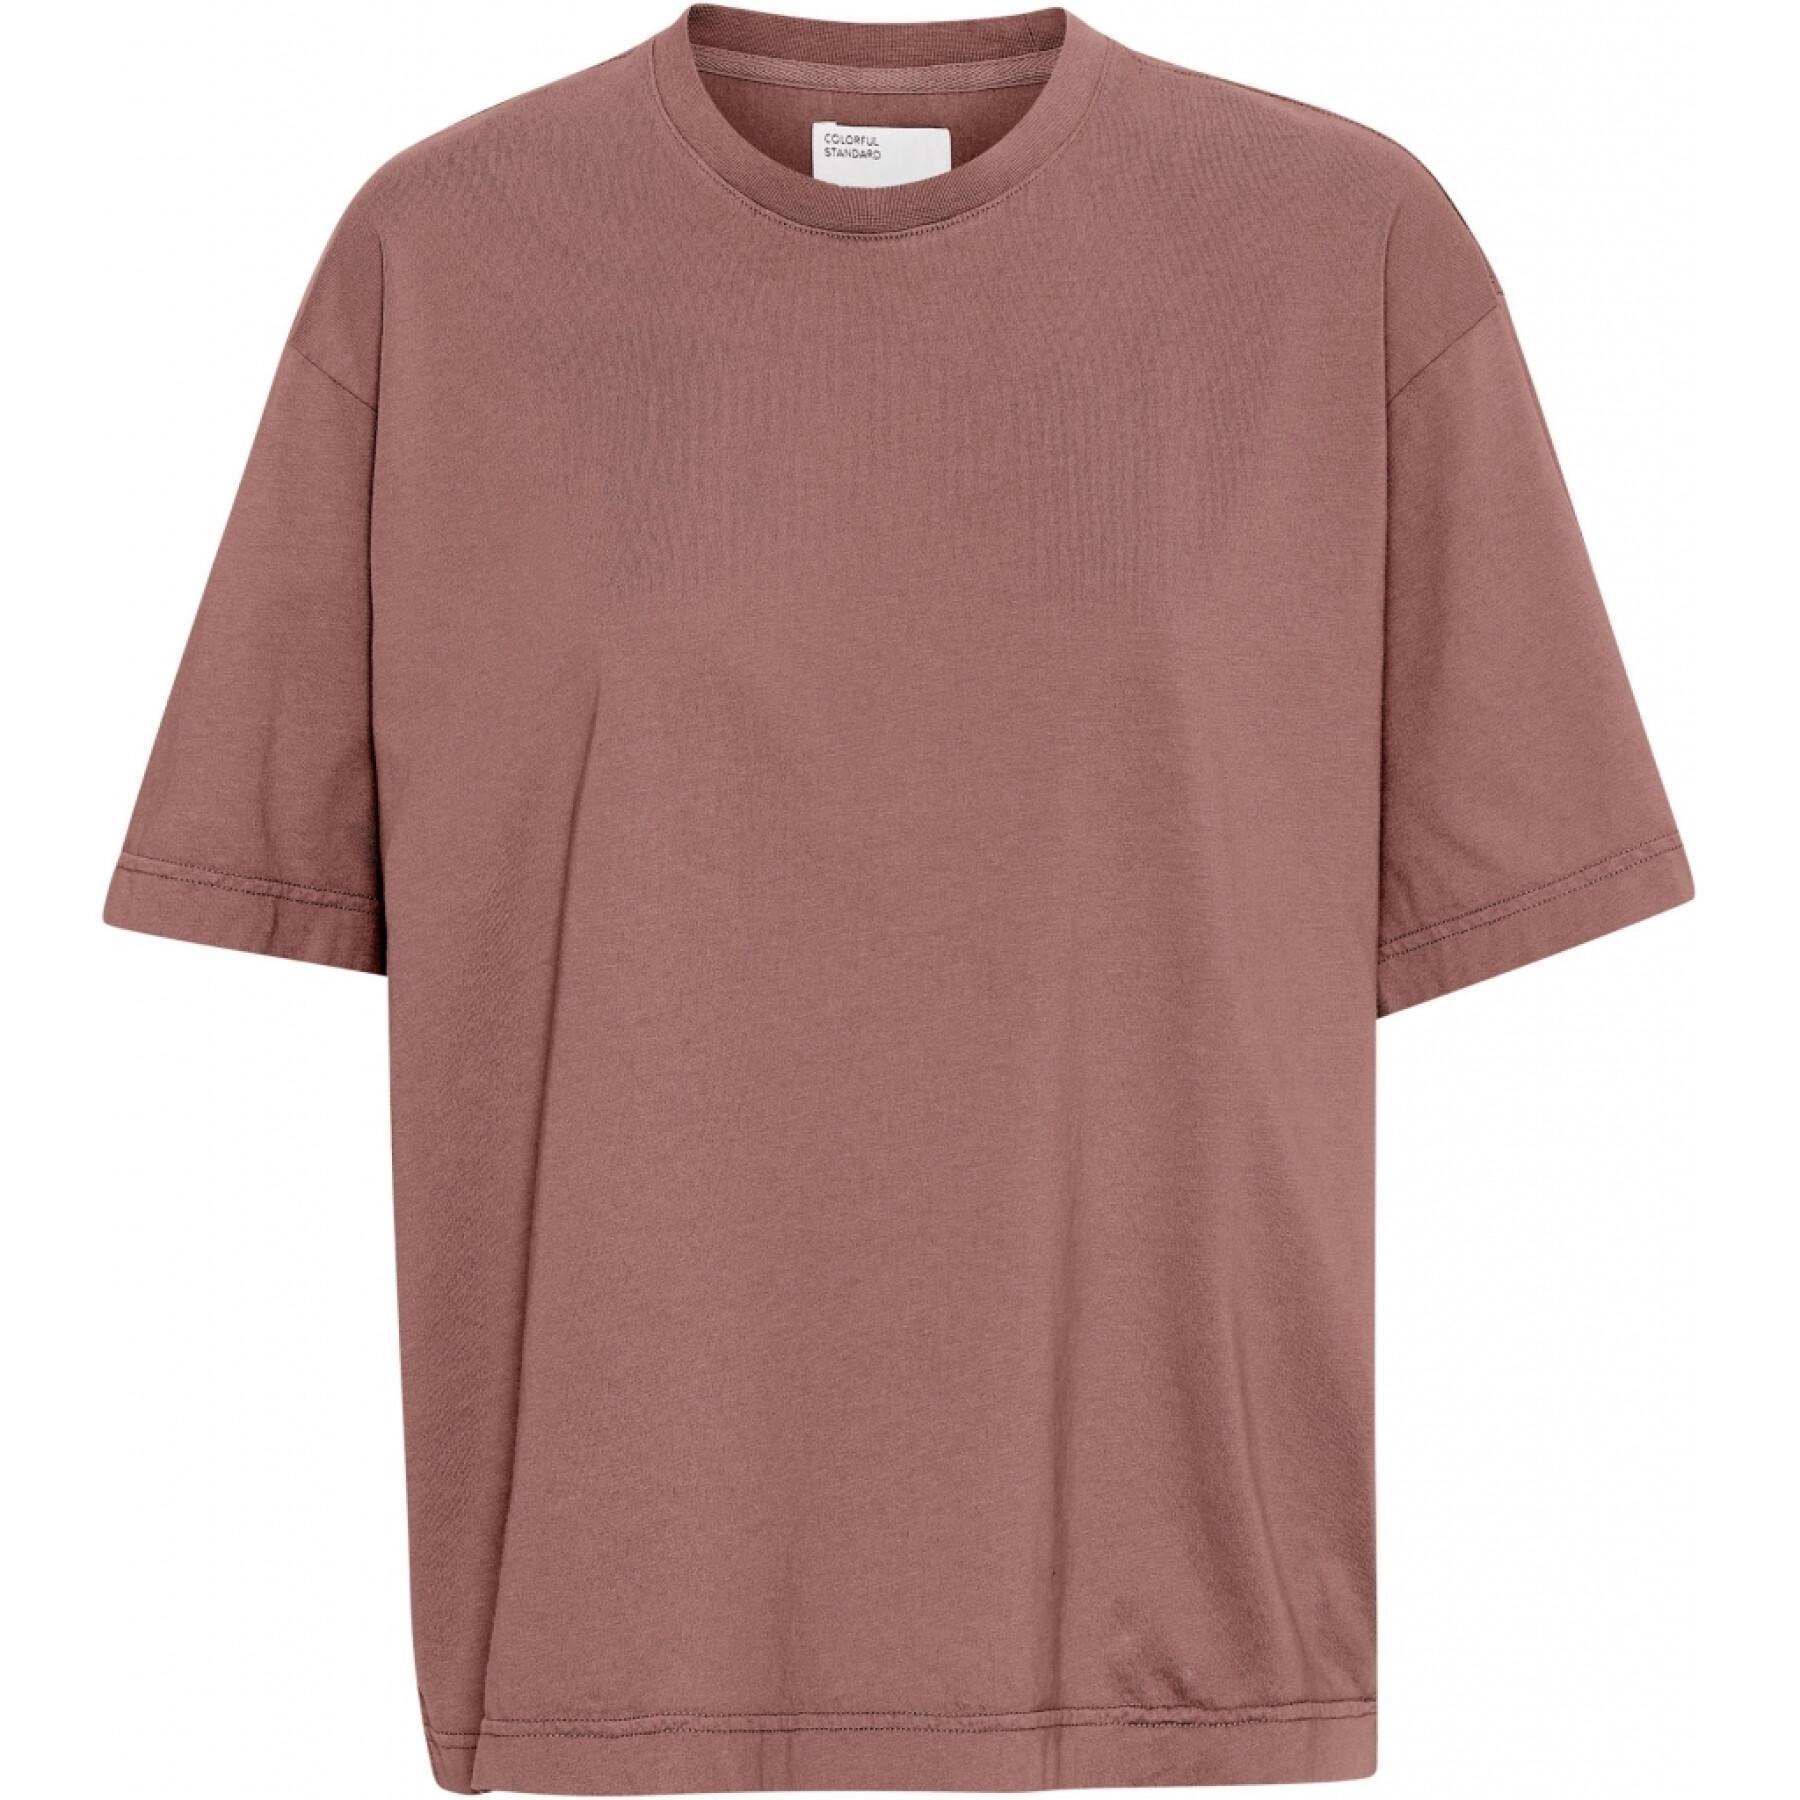 Dames-T-shirt Colorful Standard Organic oversized rosewood mist